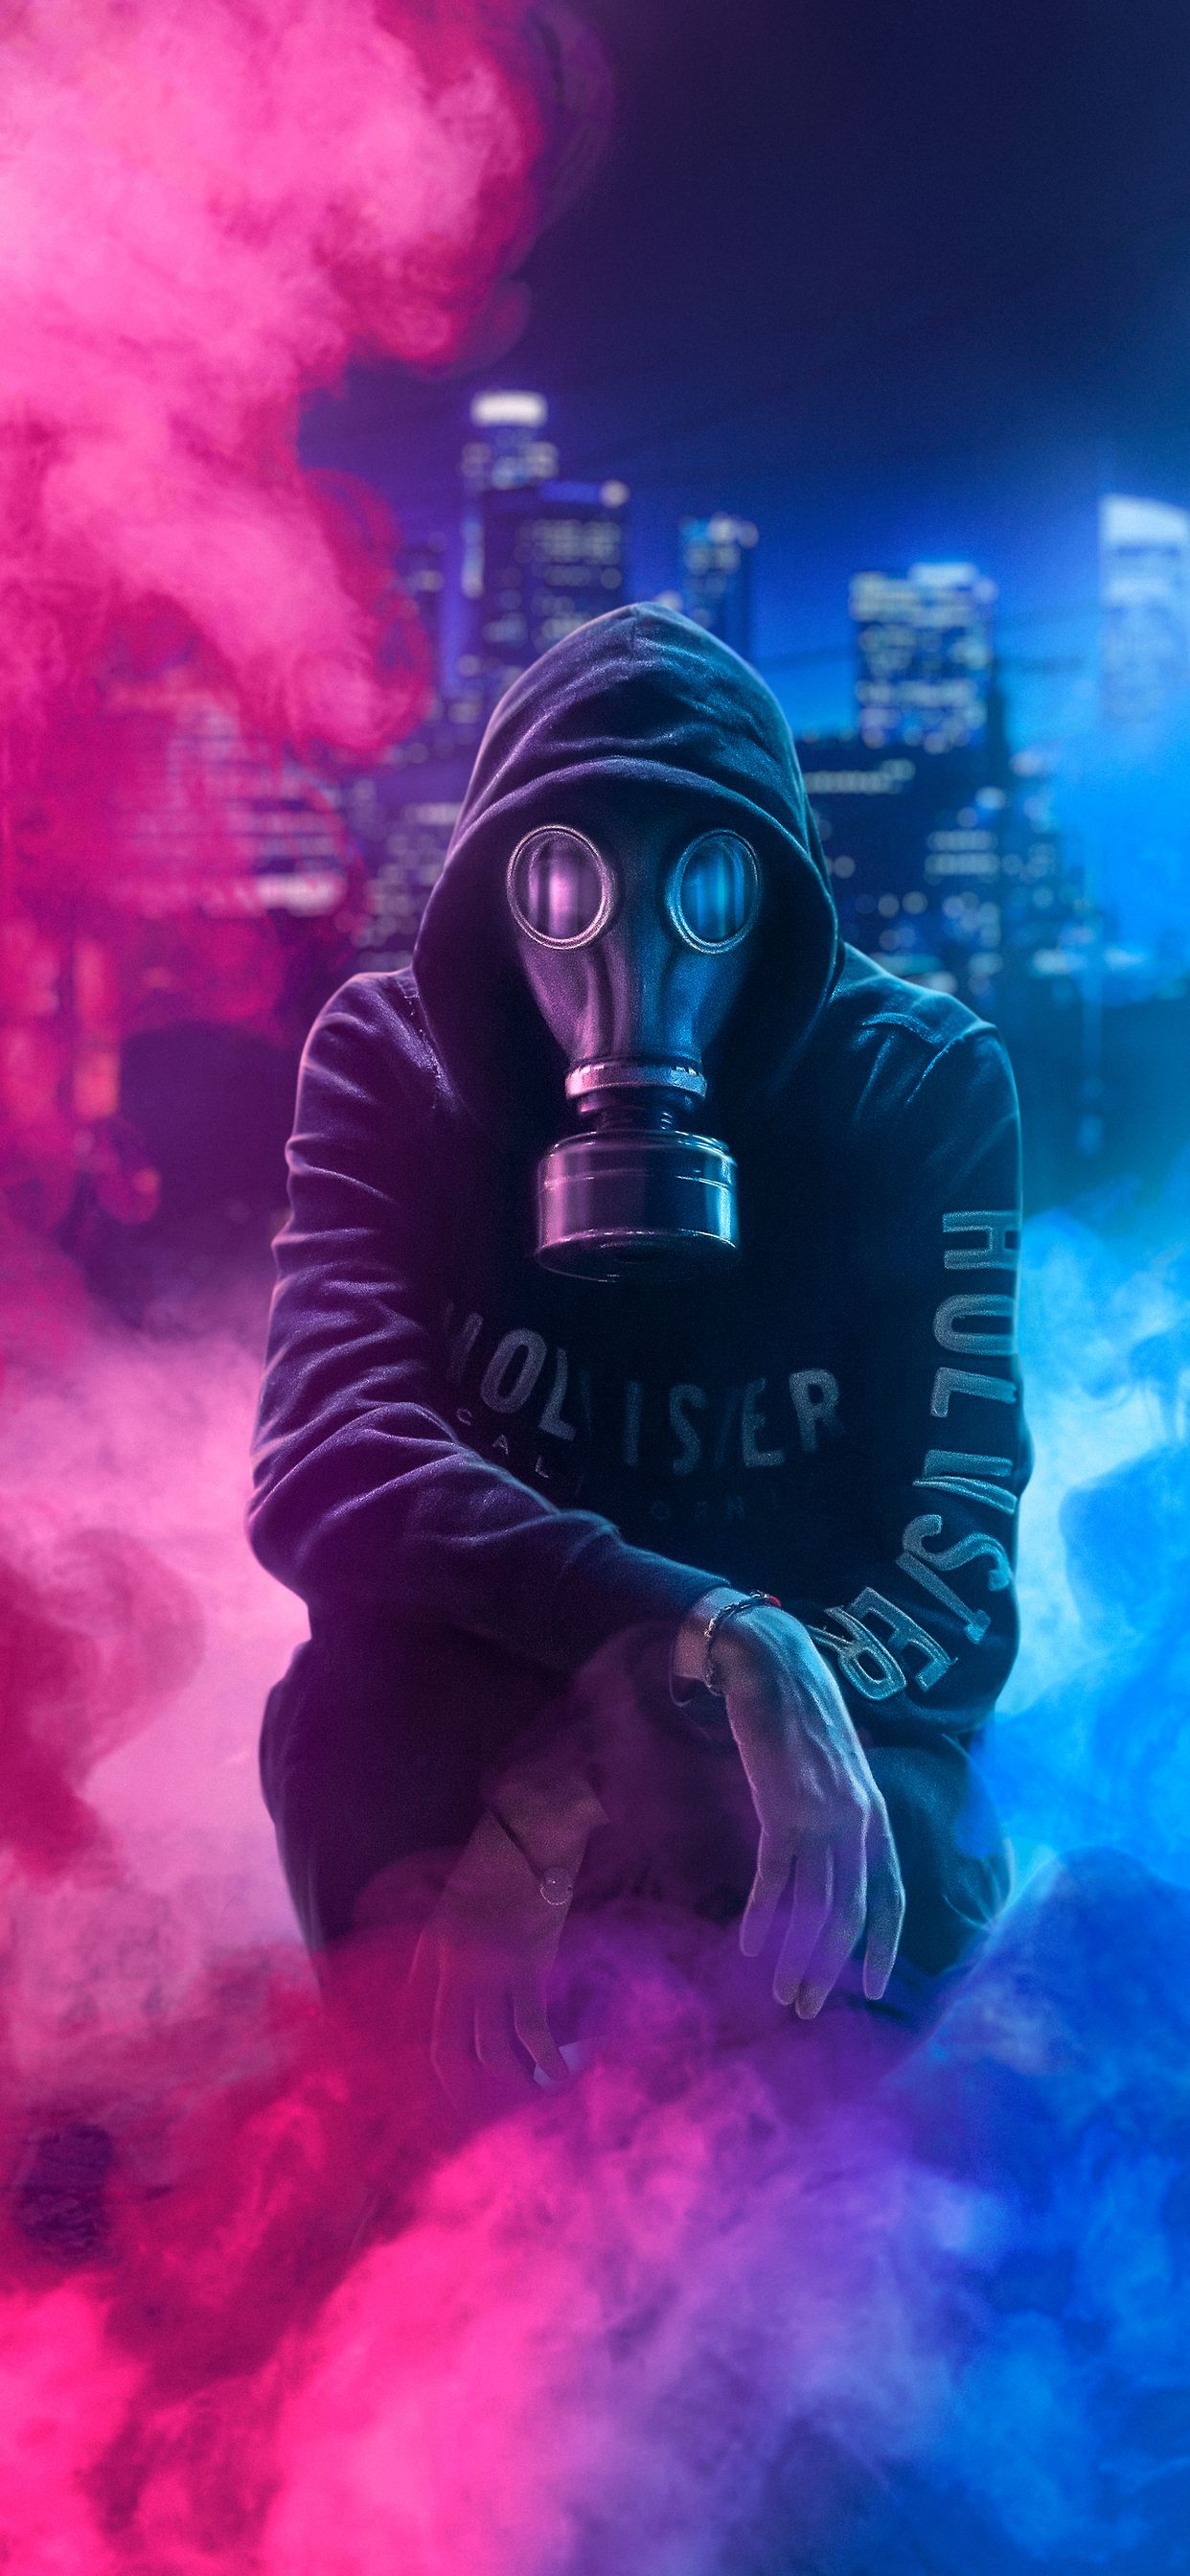 Anime Gas Mask iPhone Wallpaper